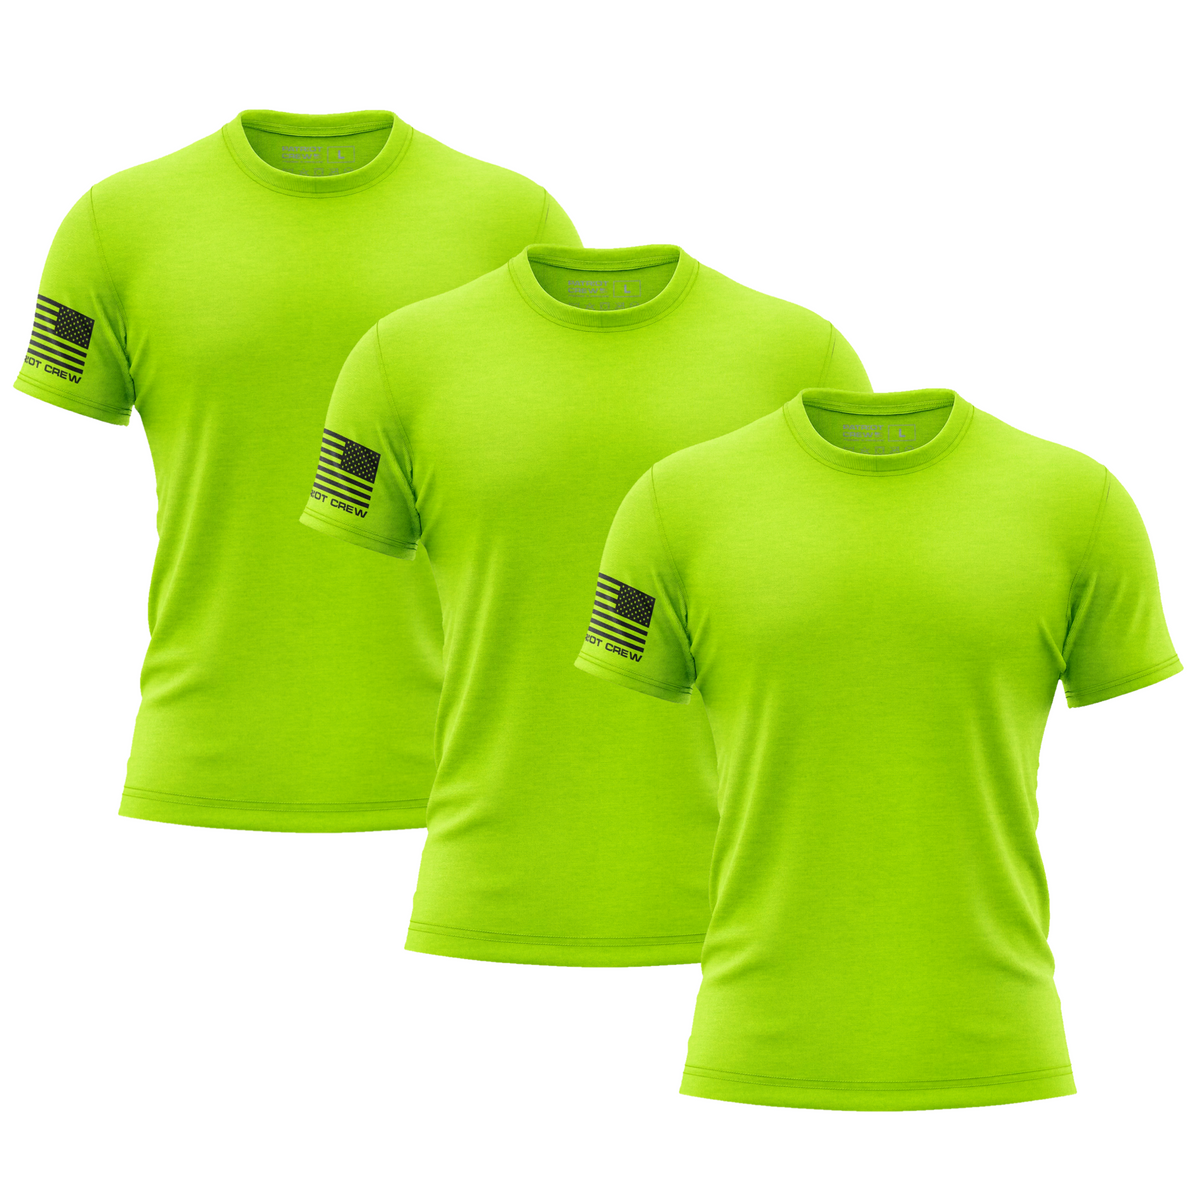 Safety Yellow T-Shirt (3 Pack)